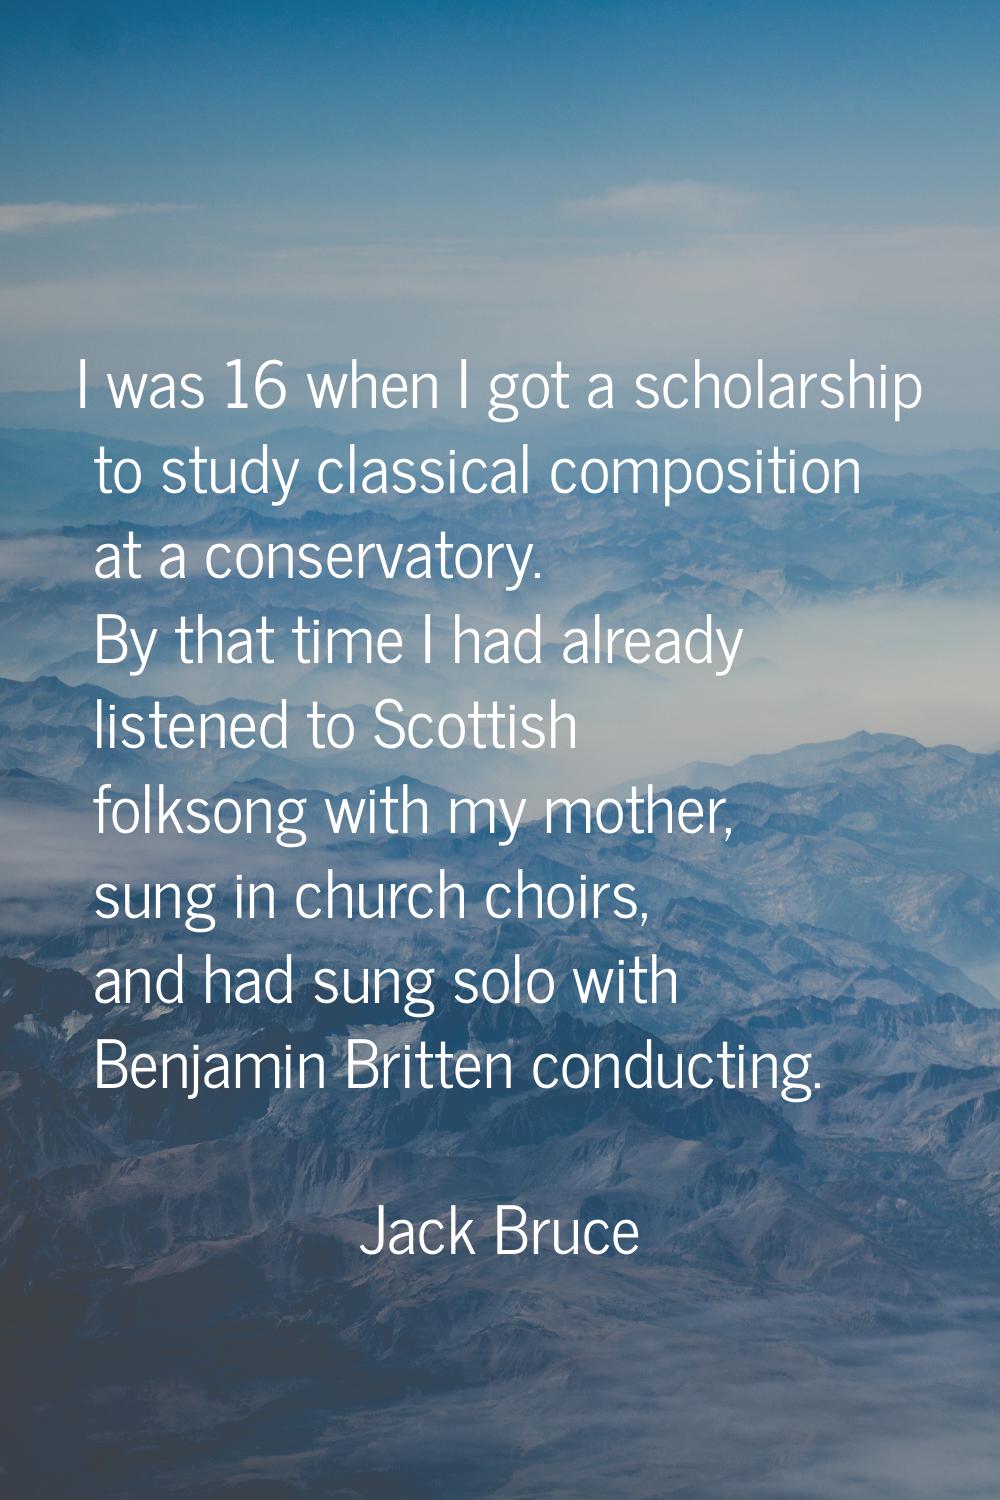 I was 16 when I got a scholarship to study classical composition at a conservatory. By that time I 